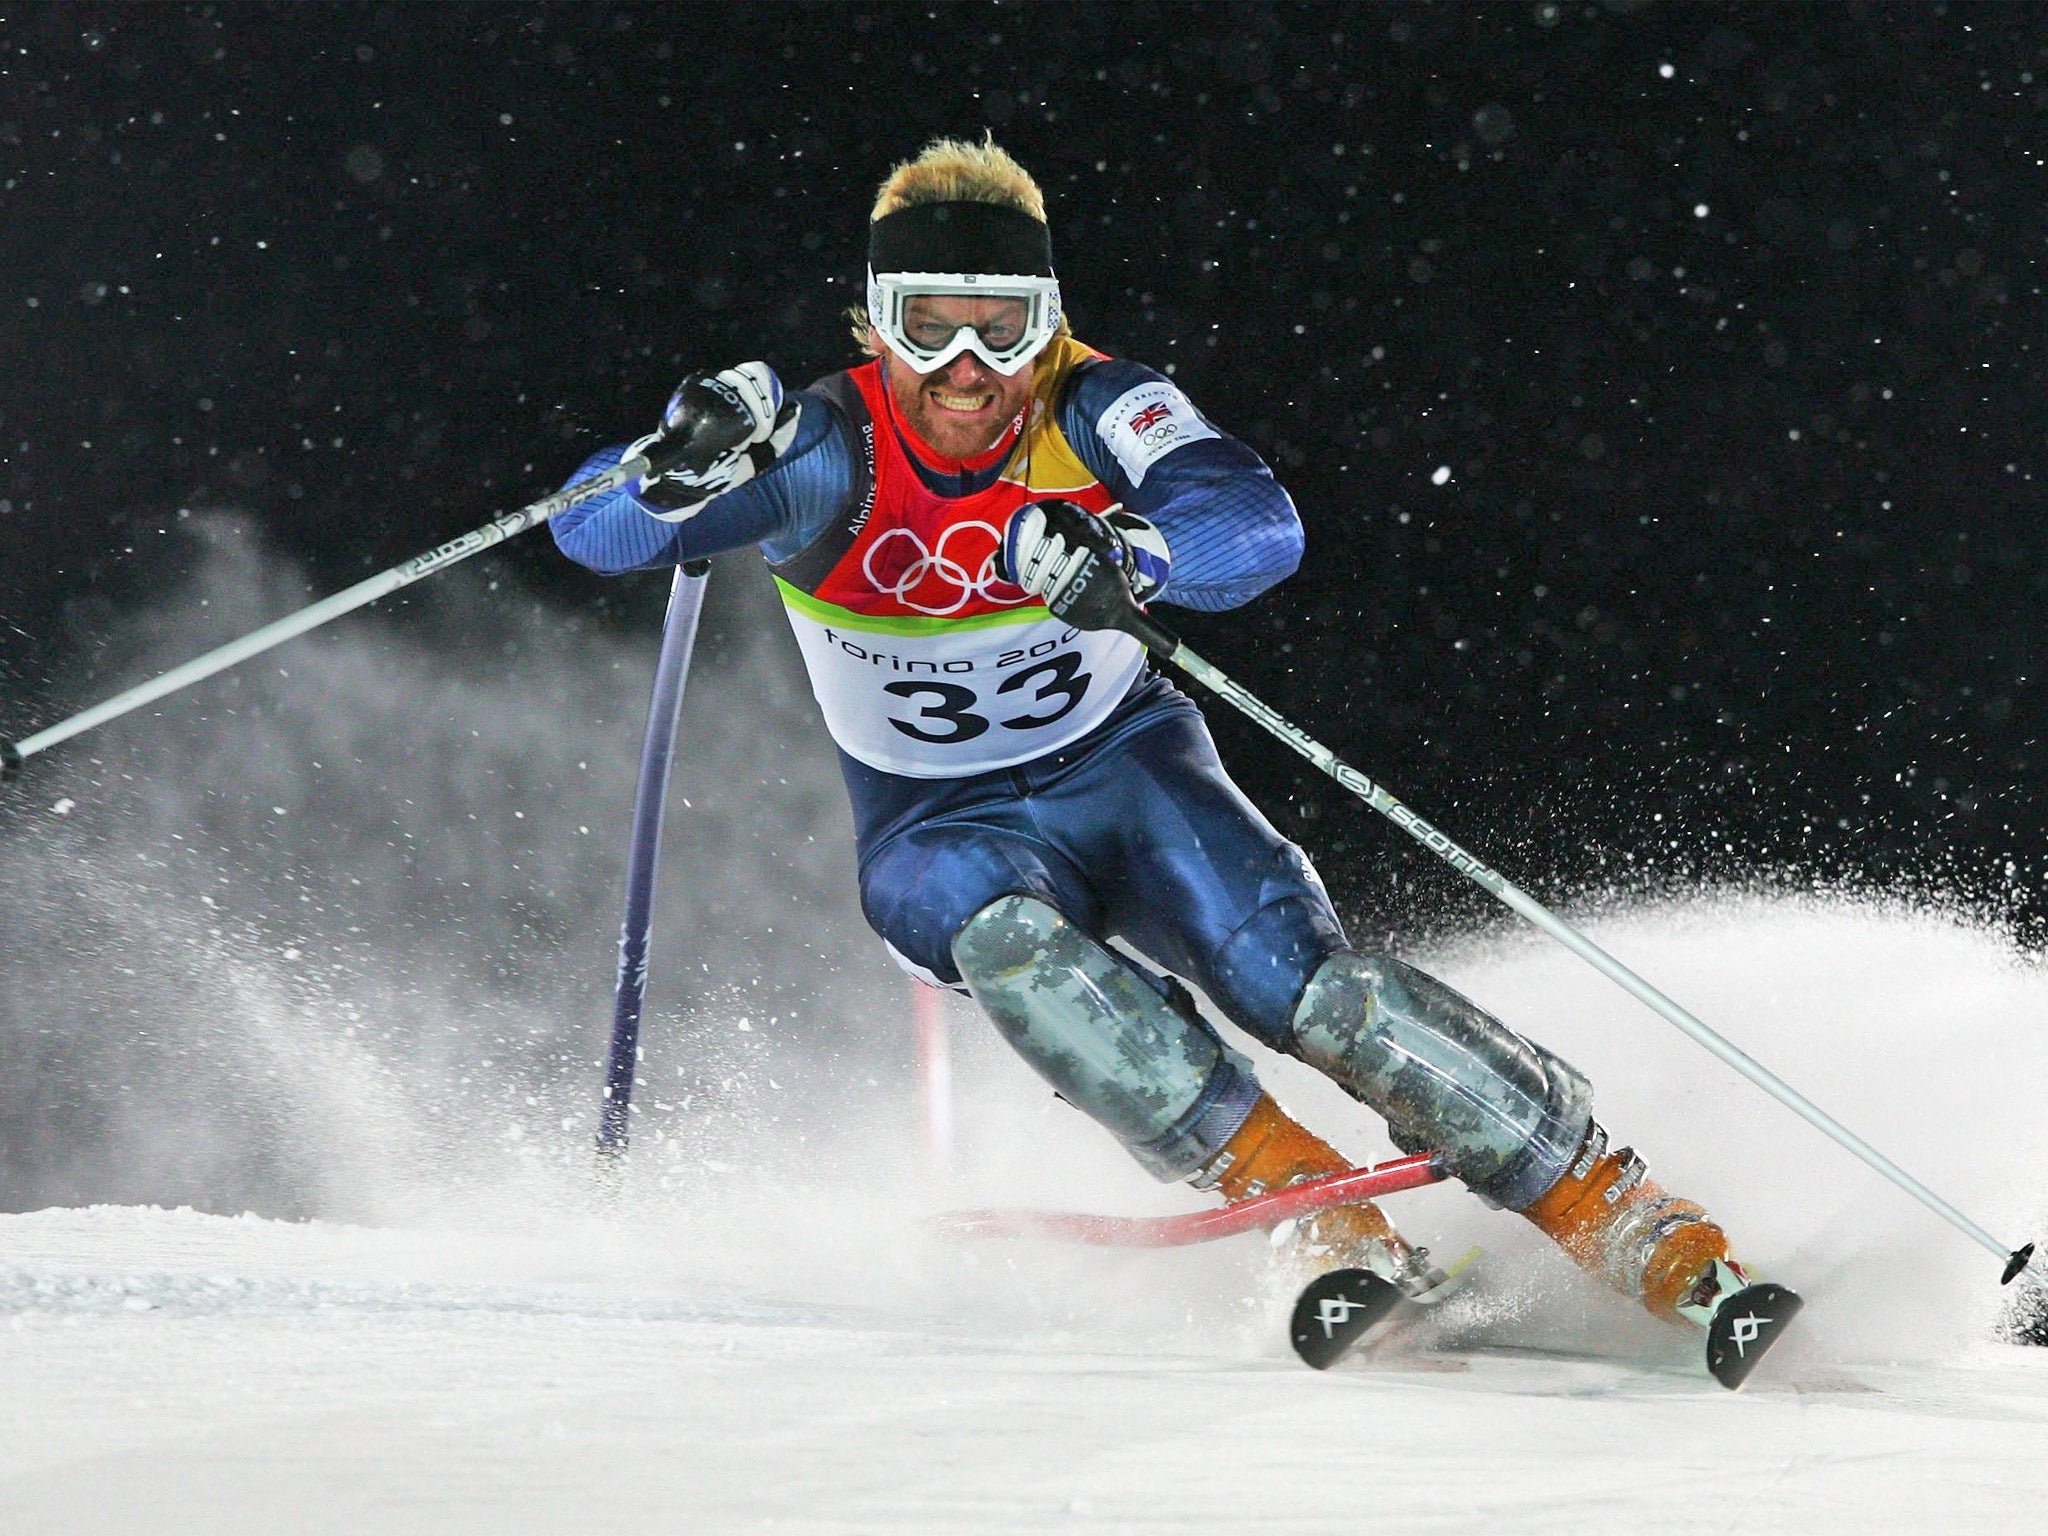 The snow man: Alain Baxter competing at the Turin Winter Olympic Games in 2006